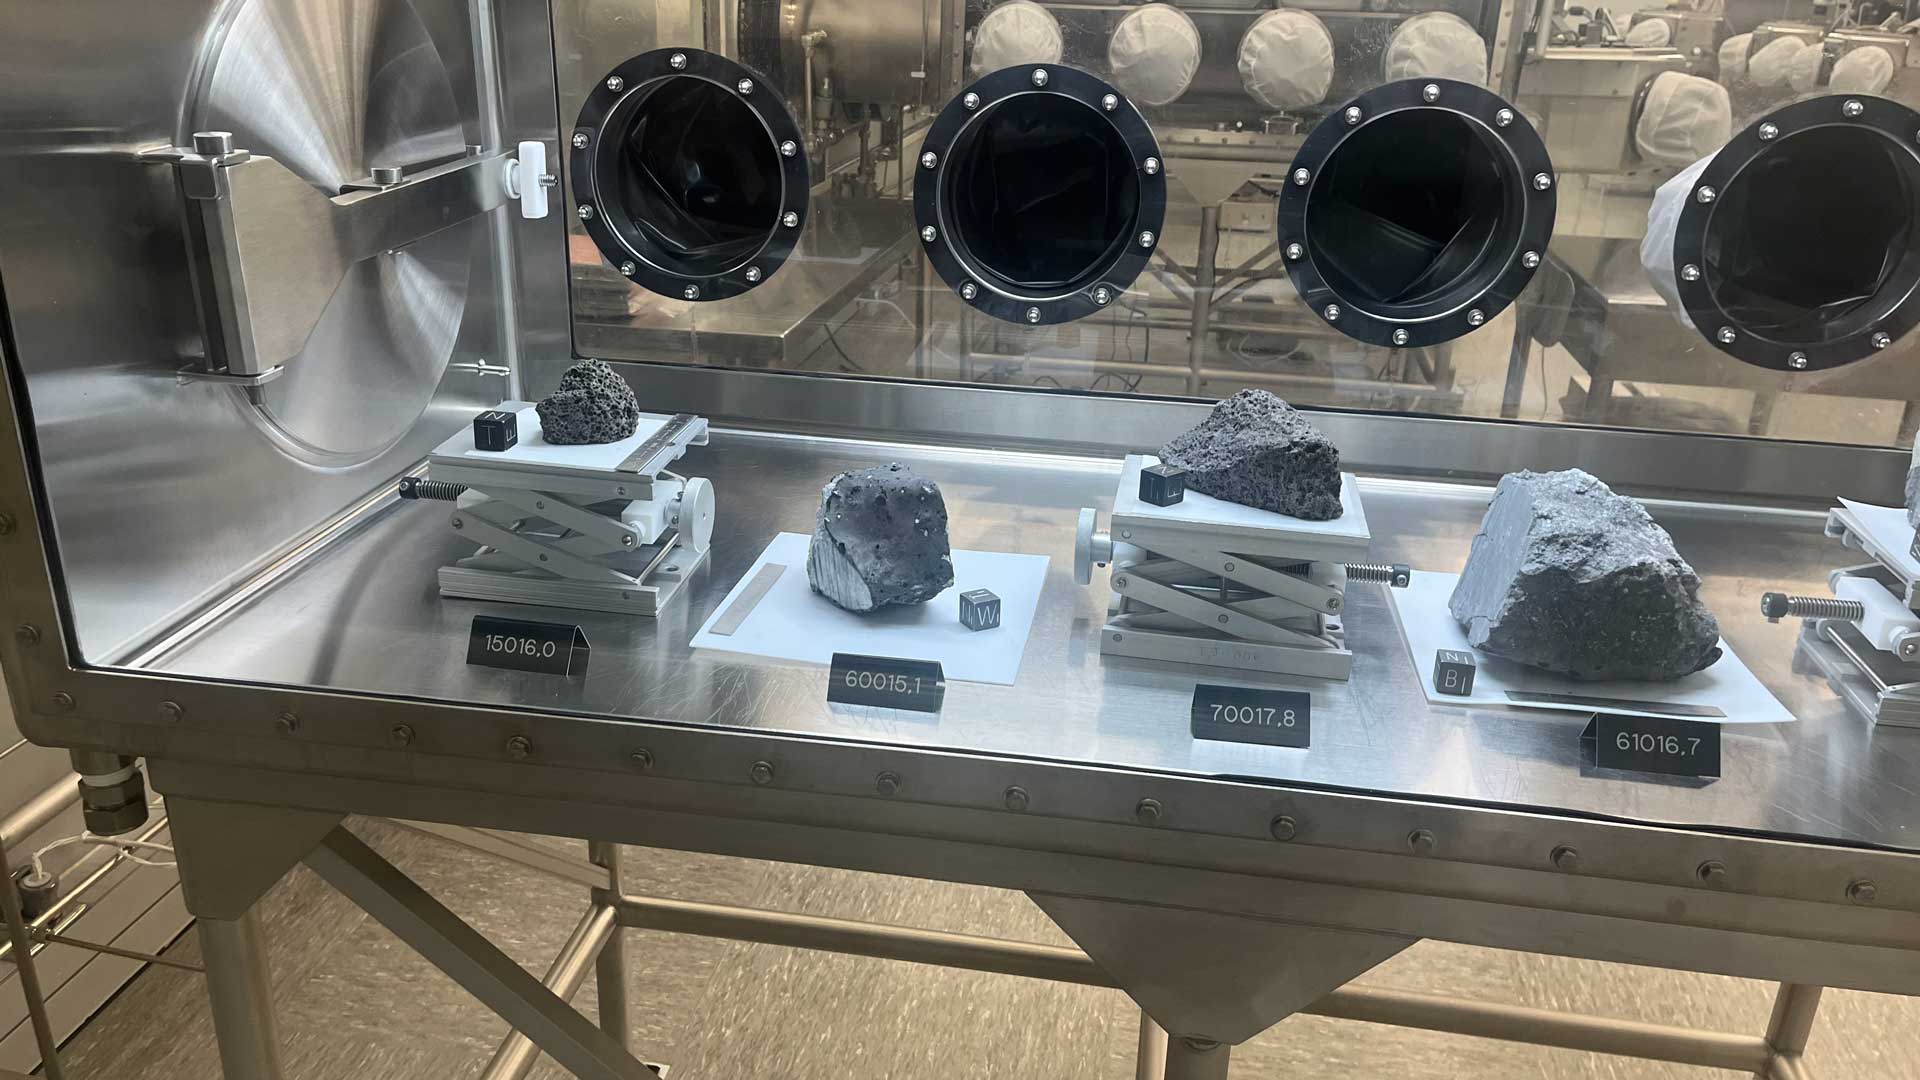 Rocks collected from the Moon by astronauts on the Apollo 15, 16, and 17 missions. The rocks are on display in the Lunar Lab at Johnson Space Center in Houston. 